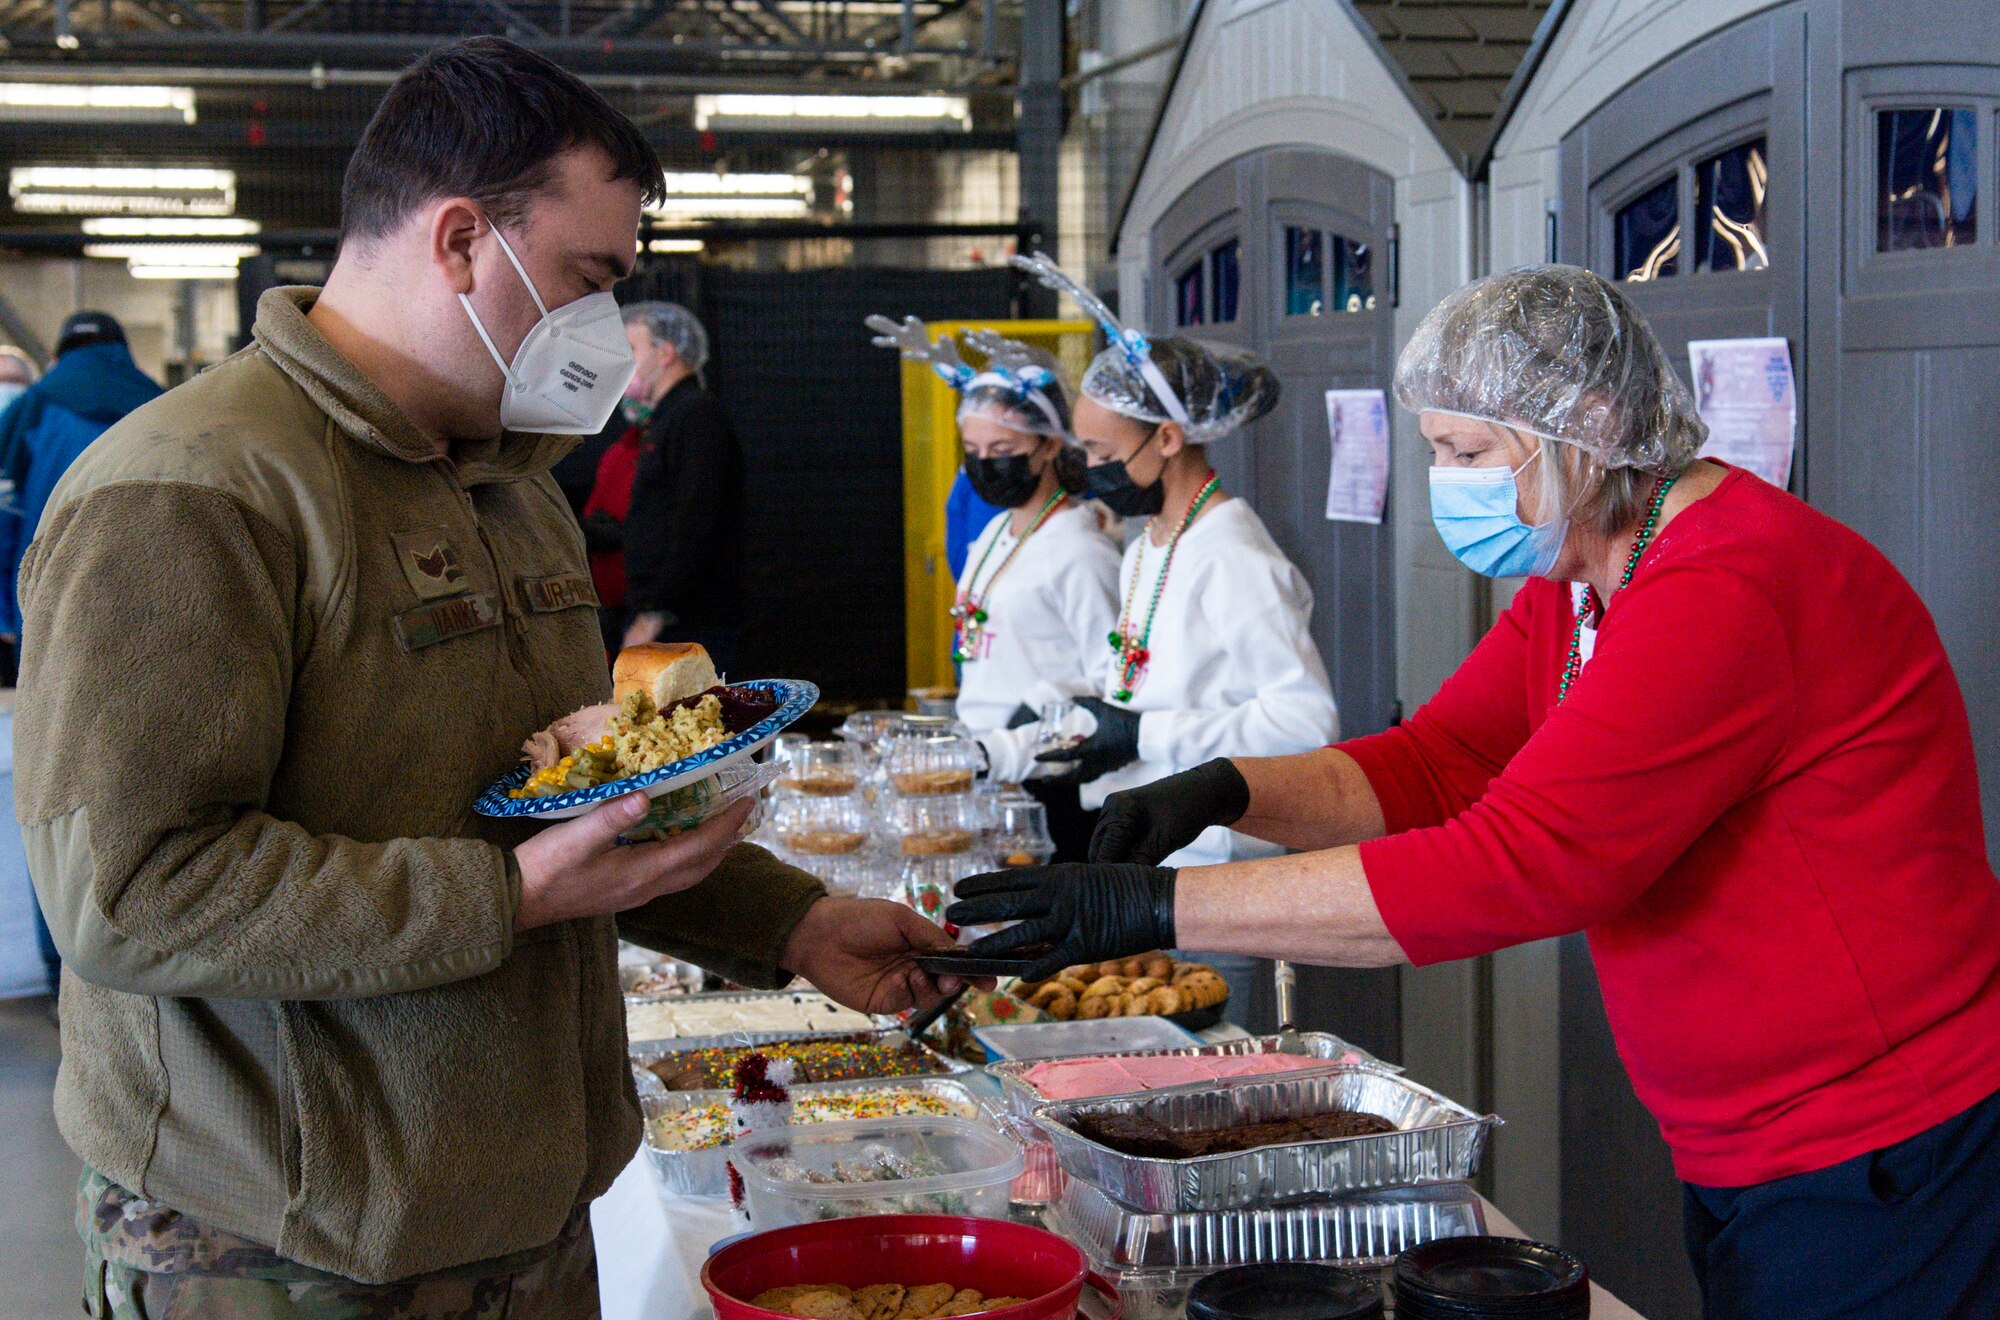 Staff Sgt. Robert Hanke, 736th Aircraft Maintenance Squadron aircraft support craftsman, gets dessert during Operation Feed the Troops on Dover Air Force Base, Delaware, Dec. 14, 2021. More than 30 volunteers served a traditional holiday meal to more than 900 Team Dover members. (U.S. Air Force photo by Roland Balik)